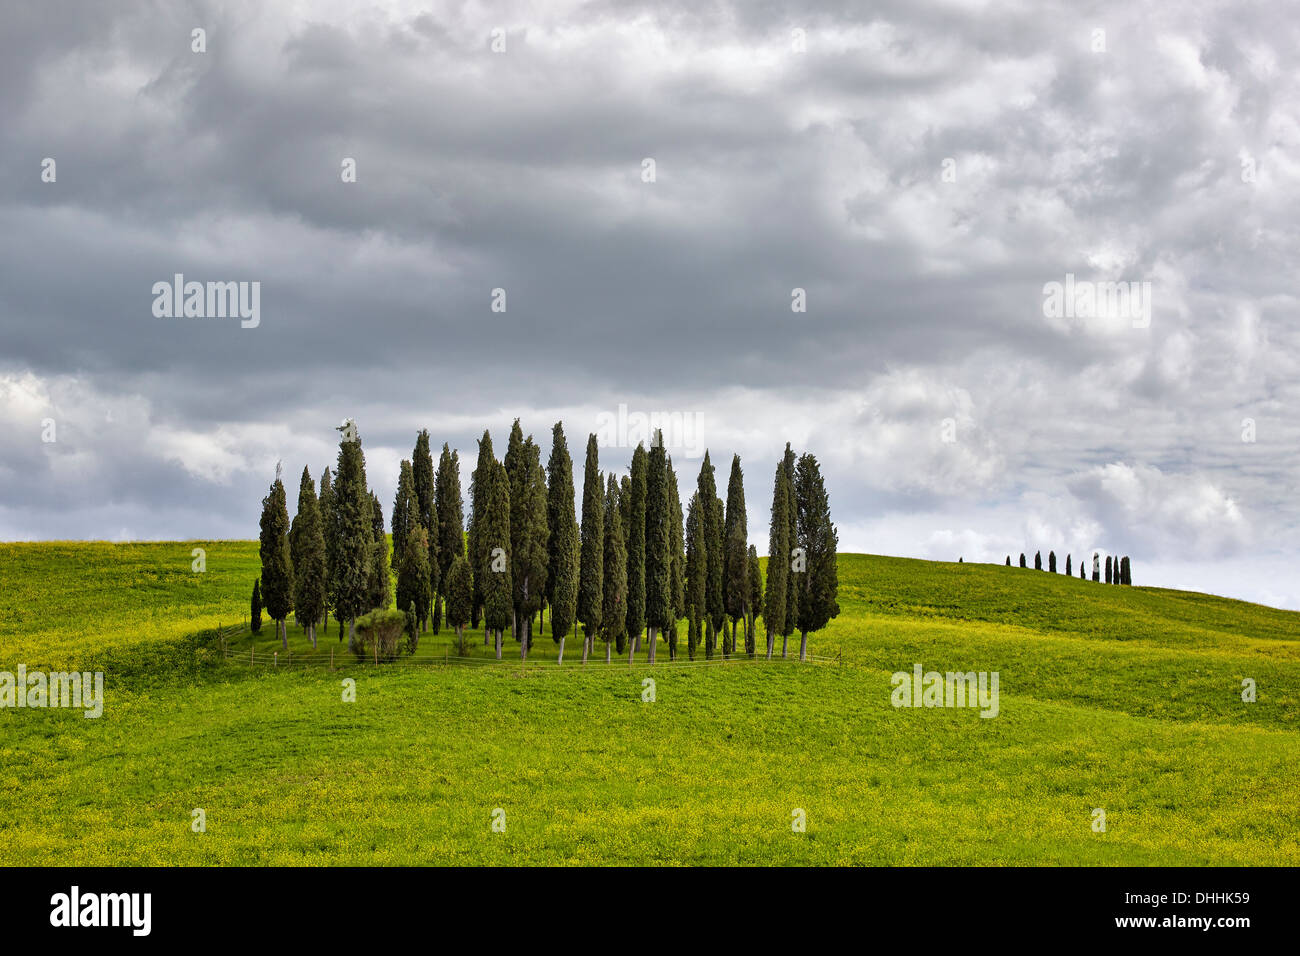 Group of cypress trees on a hilly field, Torrenieri, Montalcino, Province of Siena, Tuscany, Italy Stock Photo